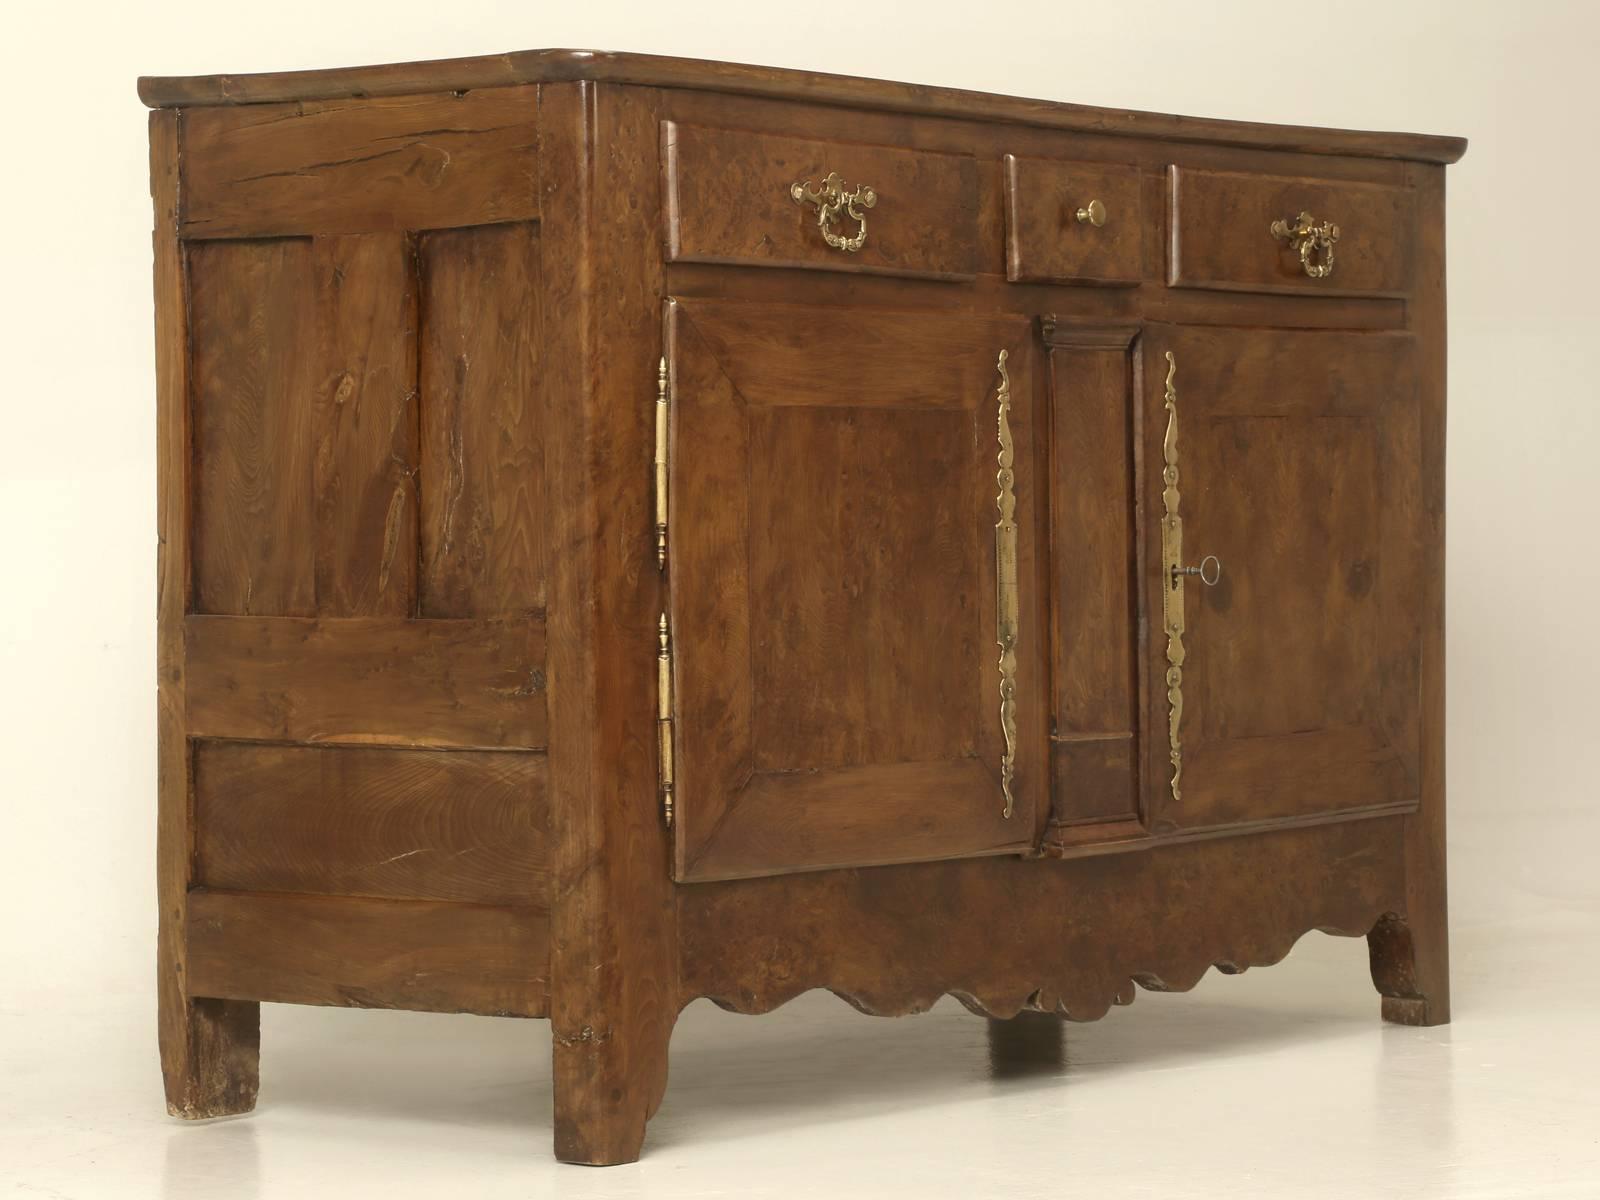 Beautiful and extremely unusual Antique “yew wood” French Louis XIII Style Buffet, with marvelous original escutcheons and in a gorgeous warm walnut color. The left-hand door is held in place with the original interior hand-forged hook. This Antique